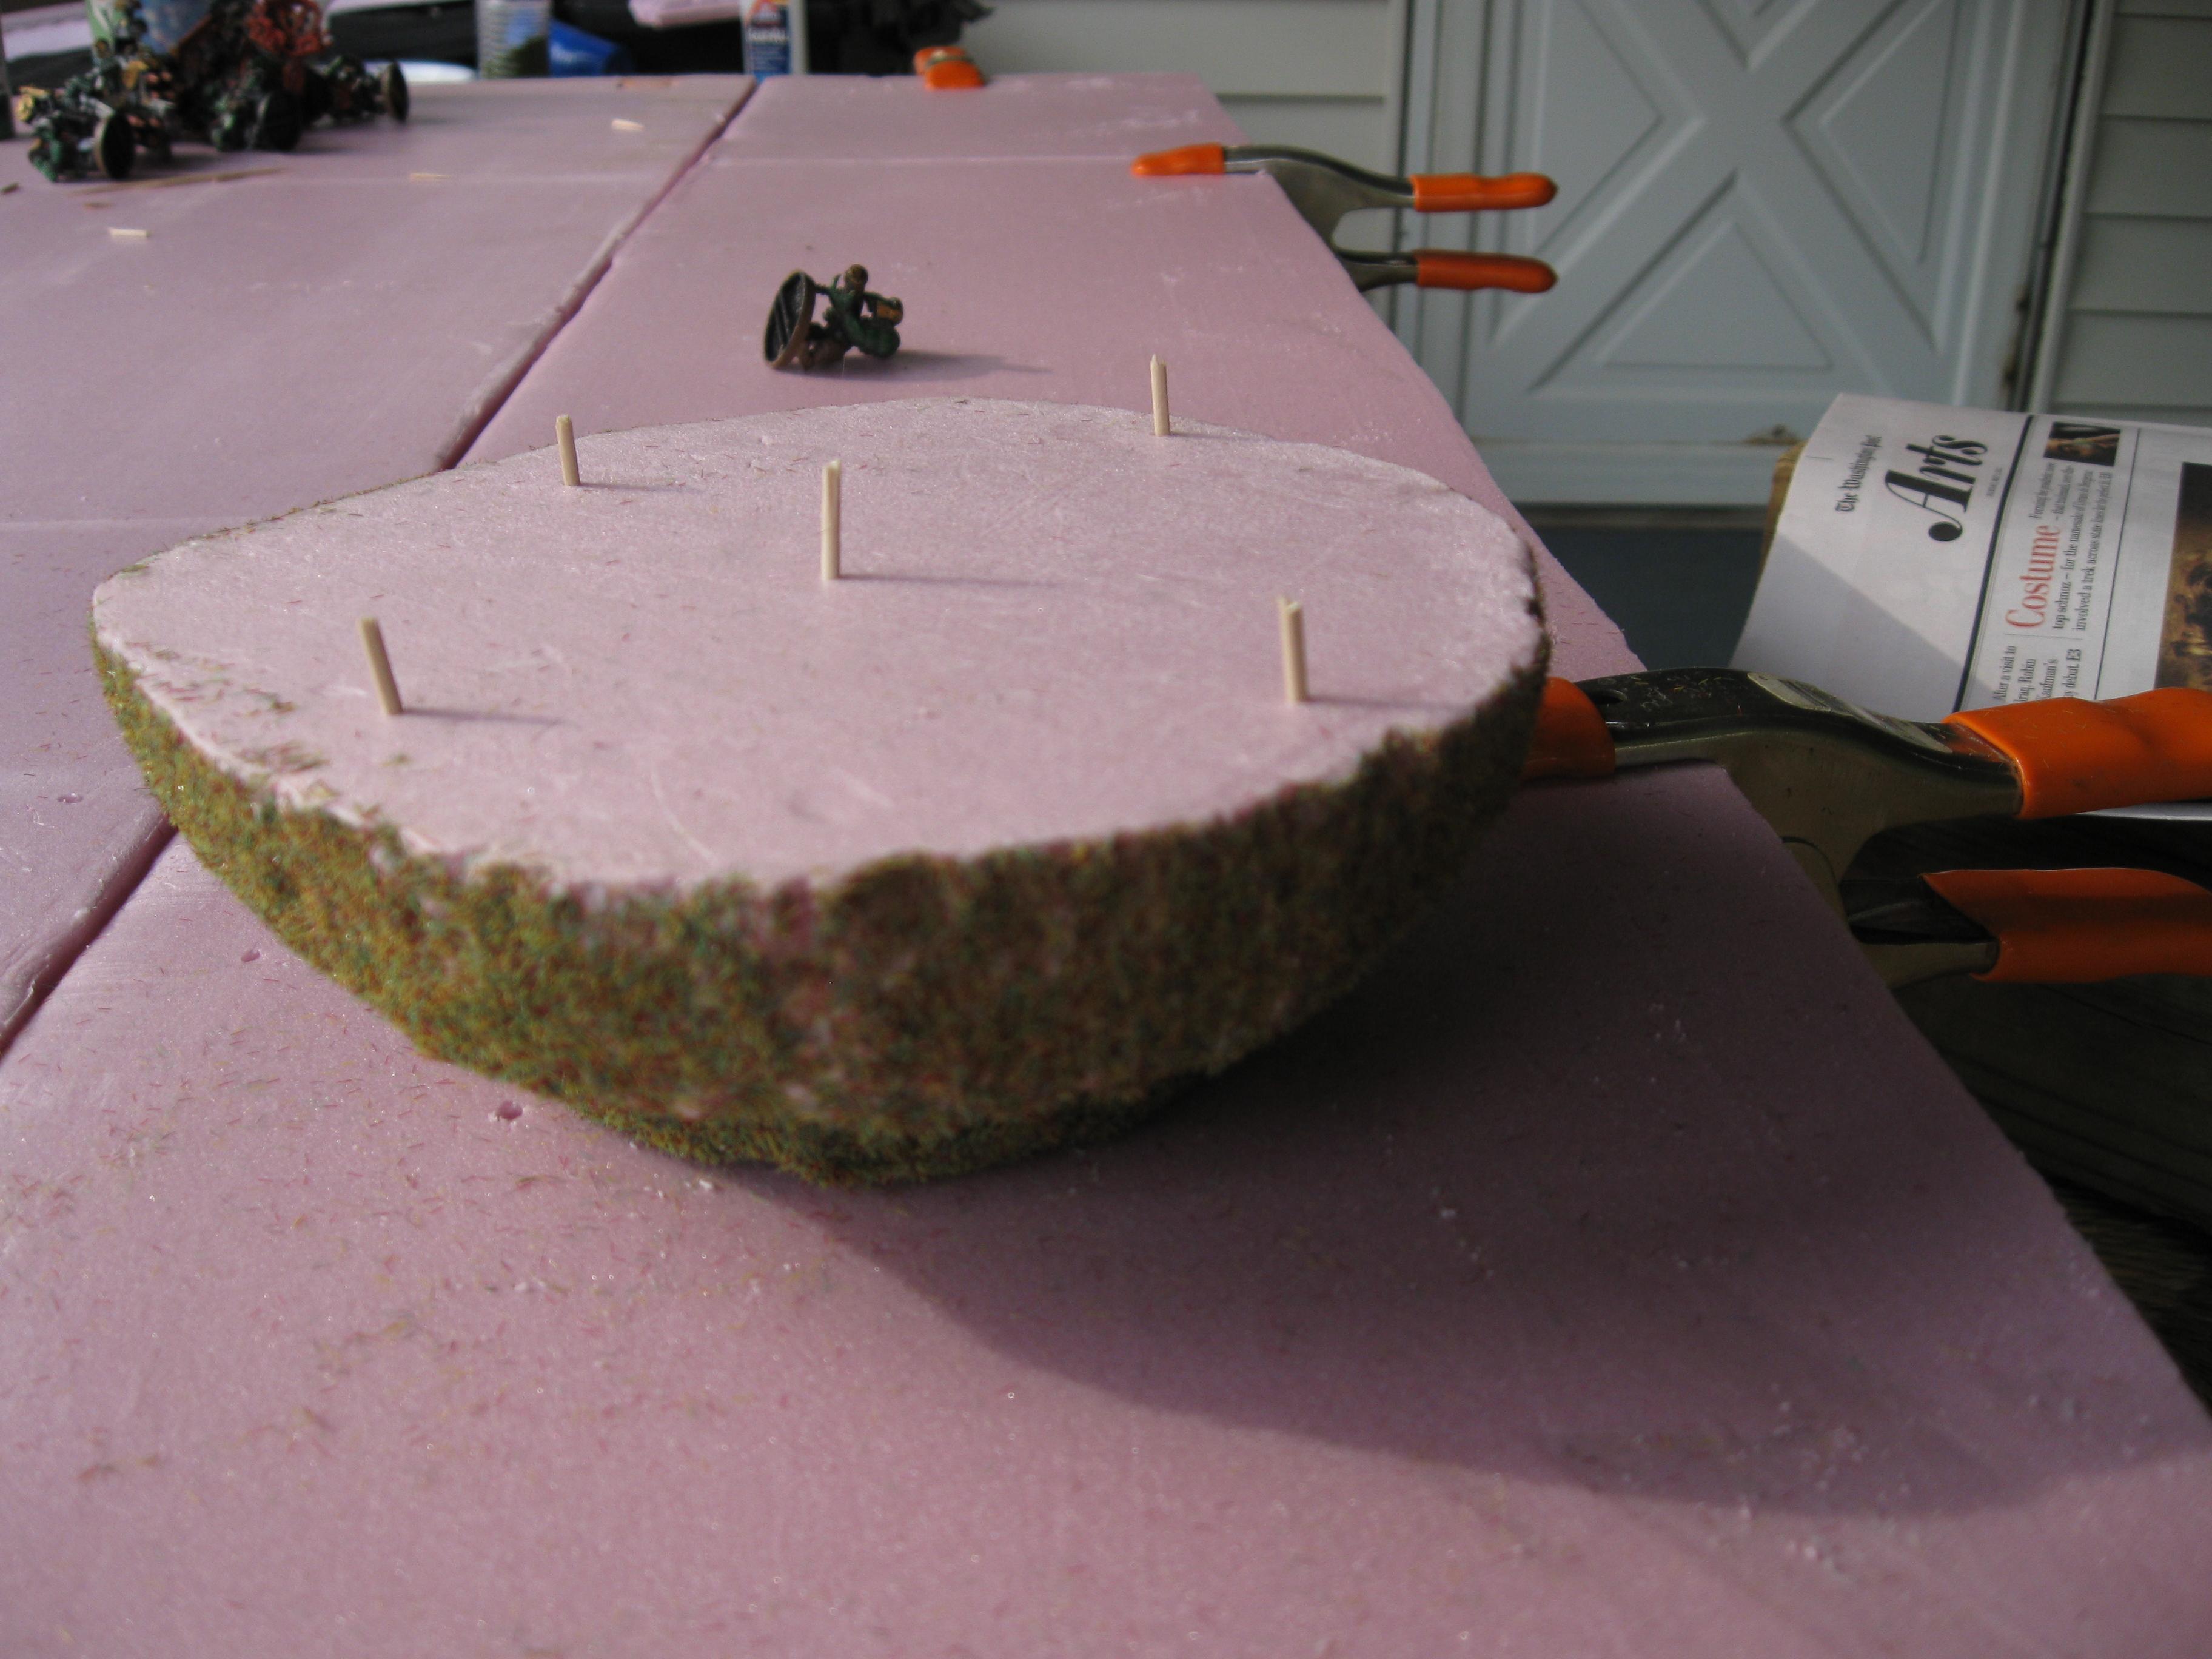 Hills were made with polystyrene. toothpick were used to hold them in place. i didn't use glue so i can take them off when not in use